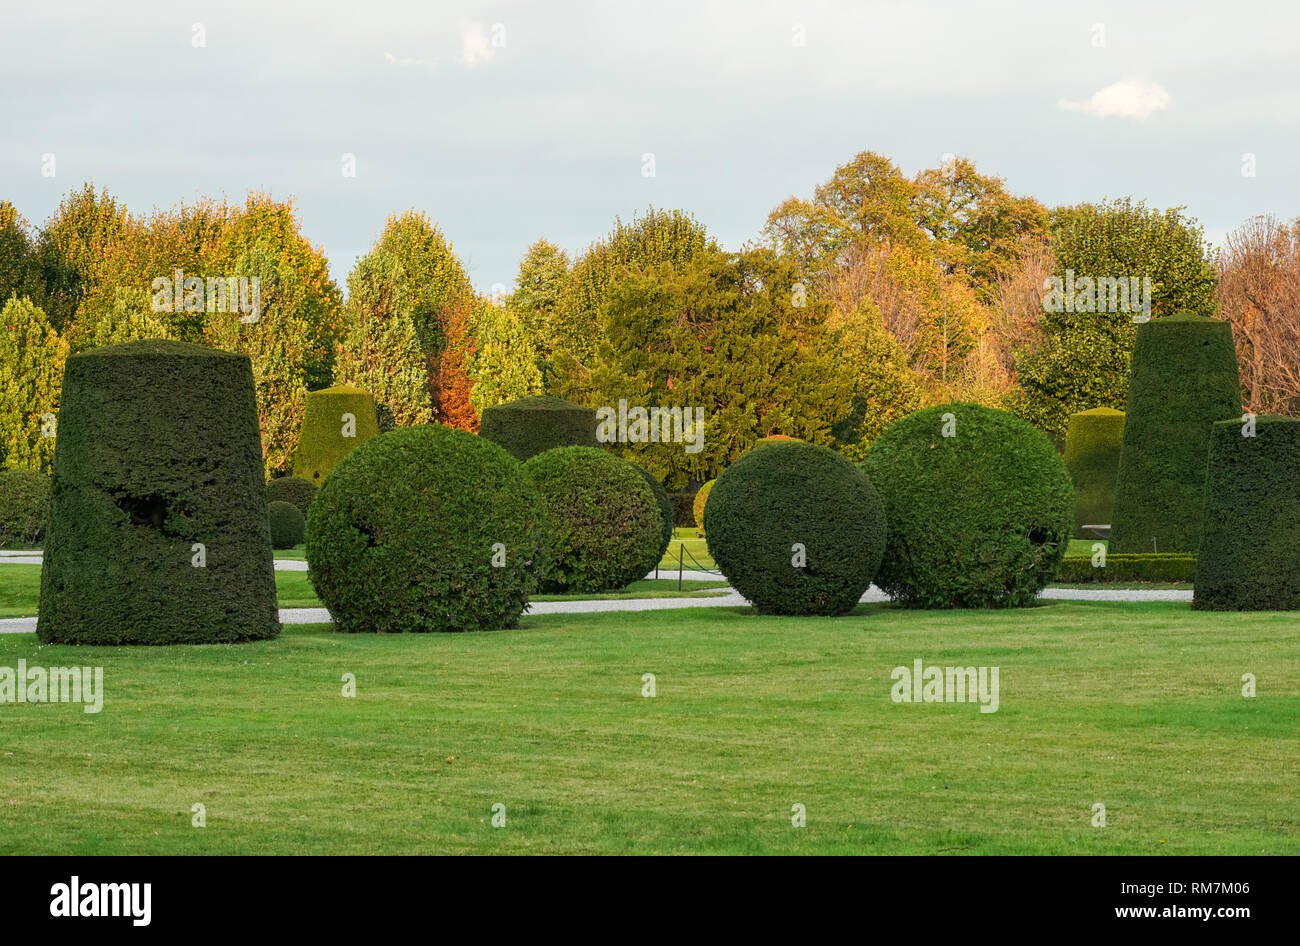 Trimmed and shaped shrubs in the Schönbrunn Palace gardens in Vienna, Austria Stock Photo